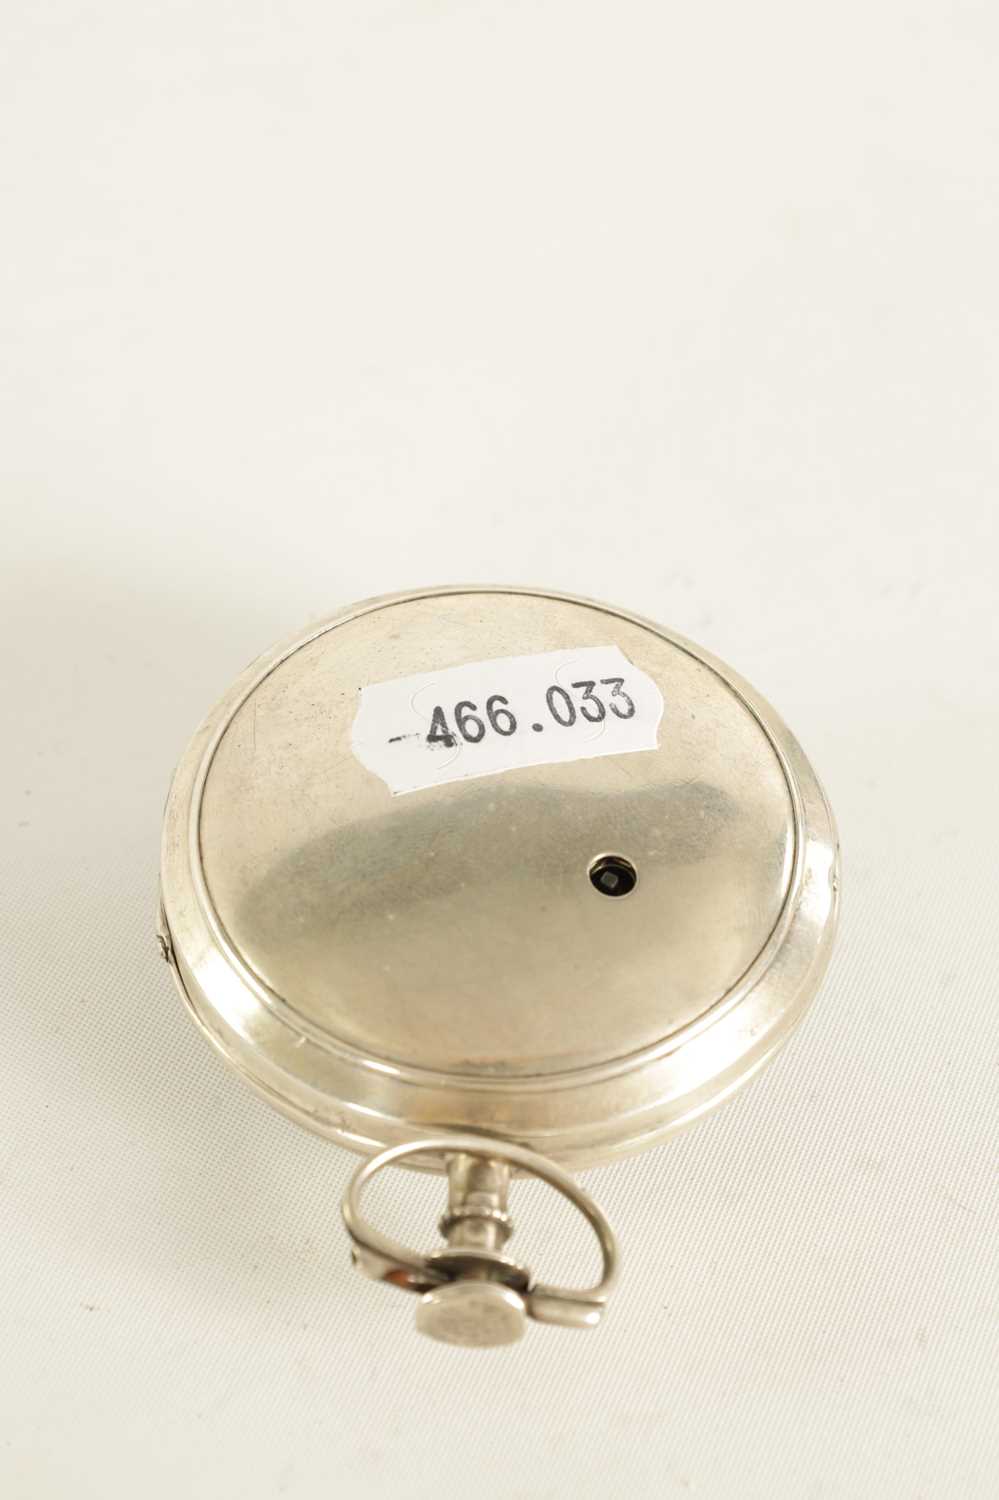 A LATE 18TH CENTURY CONTINENTAL PAIR CASE VERGE POCKET WATCH - Image 8 of 9